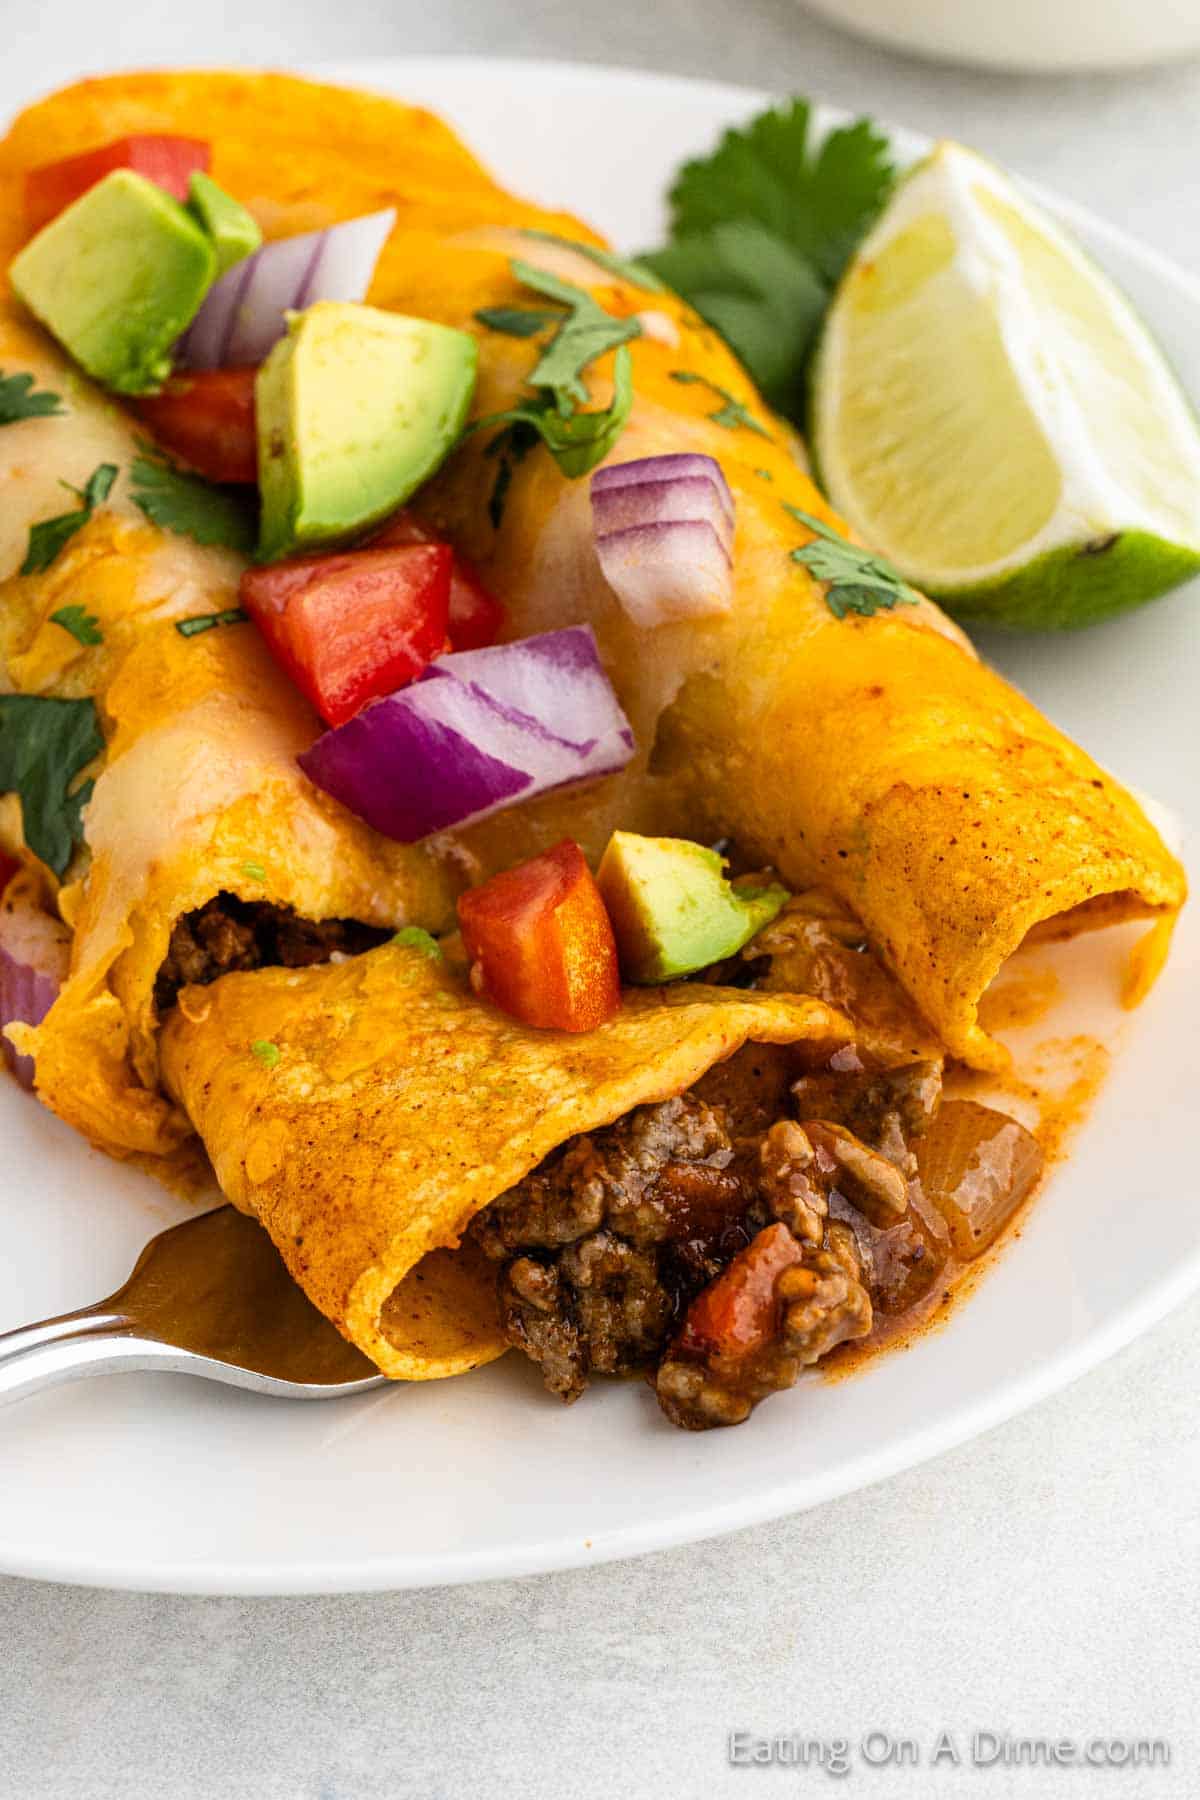 A plate with two Easy Ground Beef Enchiladas topped with melted cheese, diced avocado, tomato, red onion, and cilantro. A lime wedge is placed beside the enchiladas, and a fork is cutting into one of them, revealing the seasoned beef and vegetables inside.